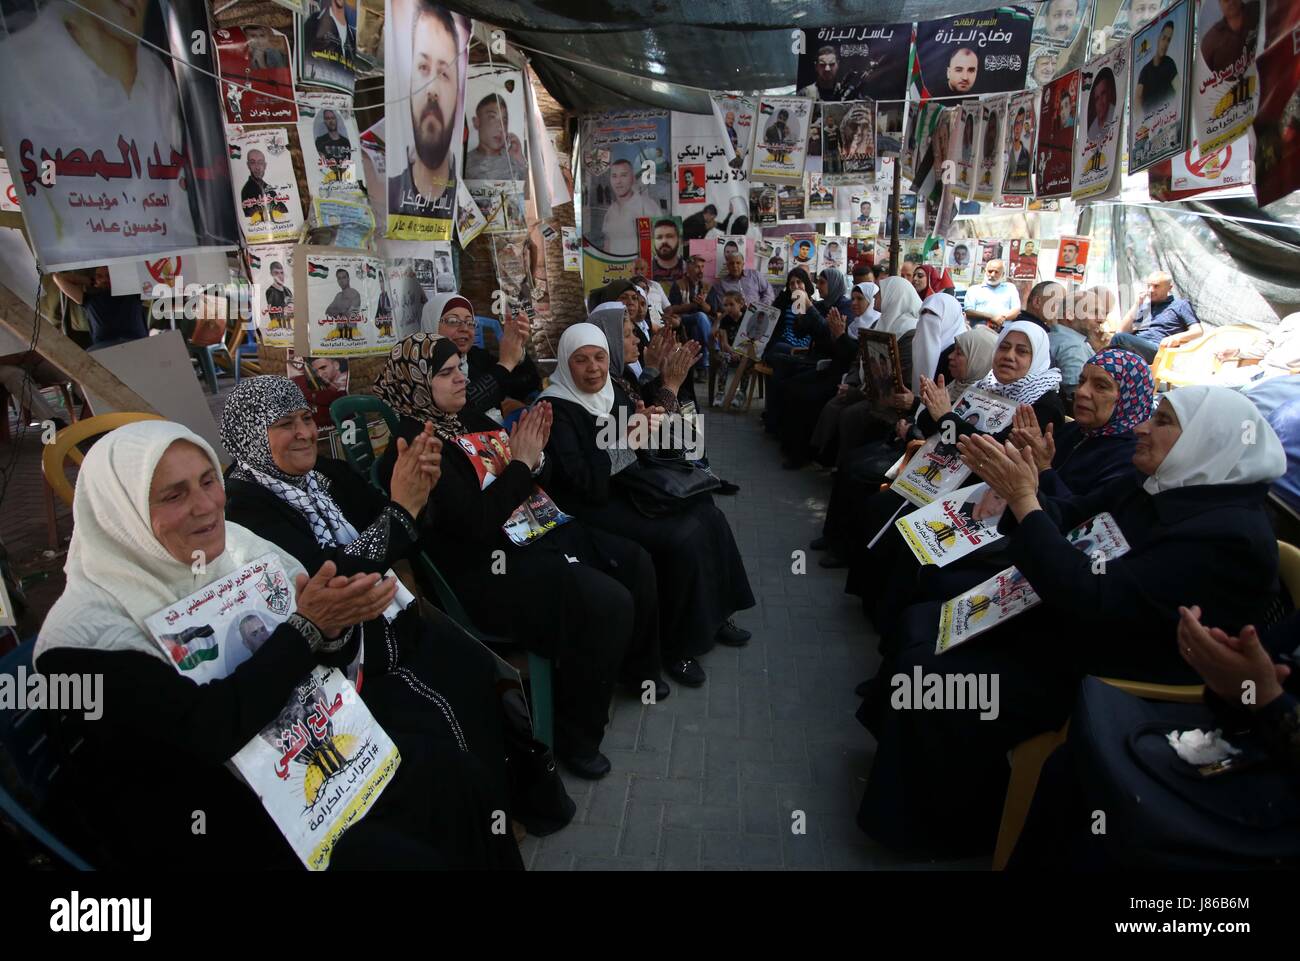 Nablus, West Bank City of Nablus. 27th May, 2017. Palestinian women hold pictures of their jailed families, as they celebrate during a protest in solidarity with prisoners in Israeli jails, in the West Bank City of Nablus, on May 27, 2017. Palestinian Fatah Party Recruitment Commissioner Jamal Muheisen declared that over 1,500 Palestinian prisoners in Israeli jails have suspended their hunger strike after a deal with the Israeli Prisons Authority. Credit: Ayman Nobani/Xinhua/Alamy Live News Stock Photo